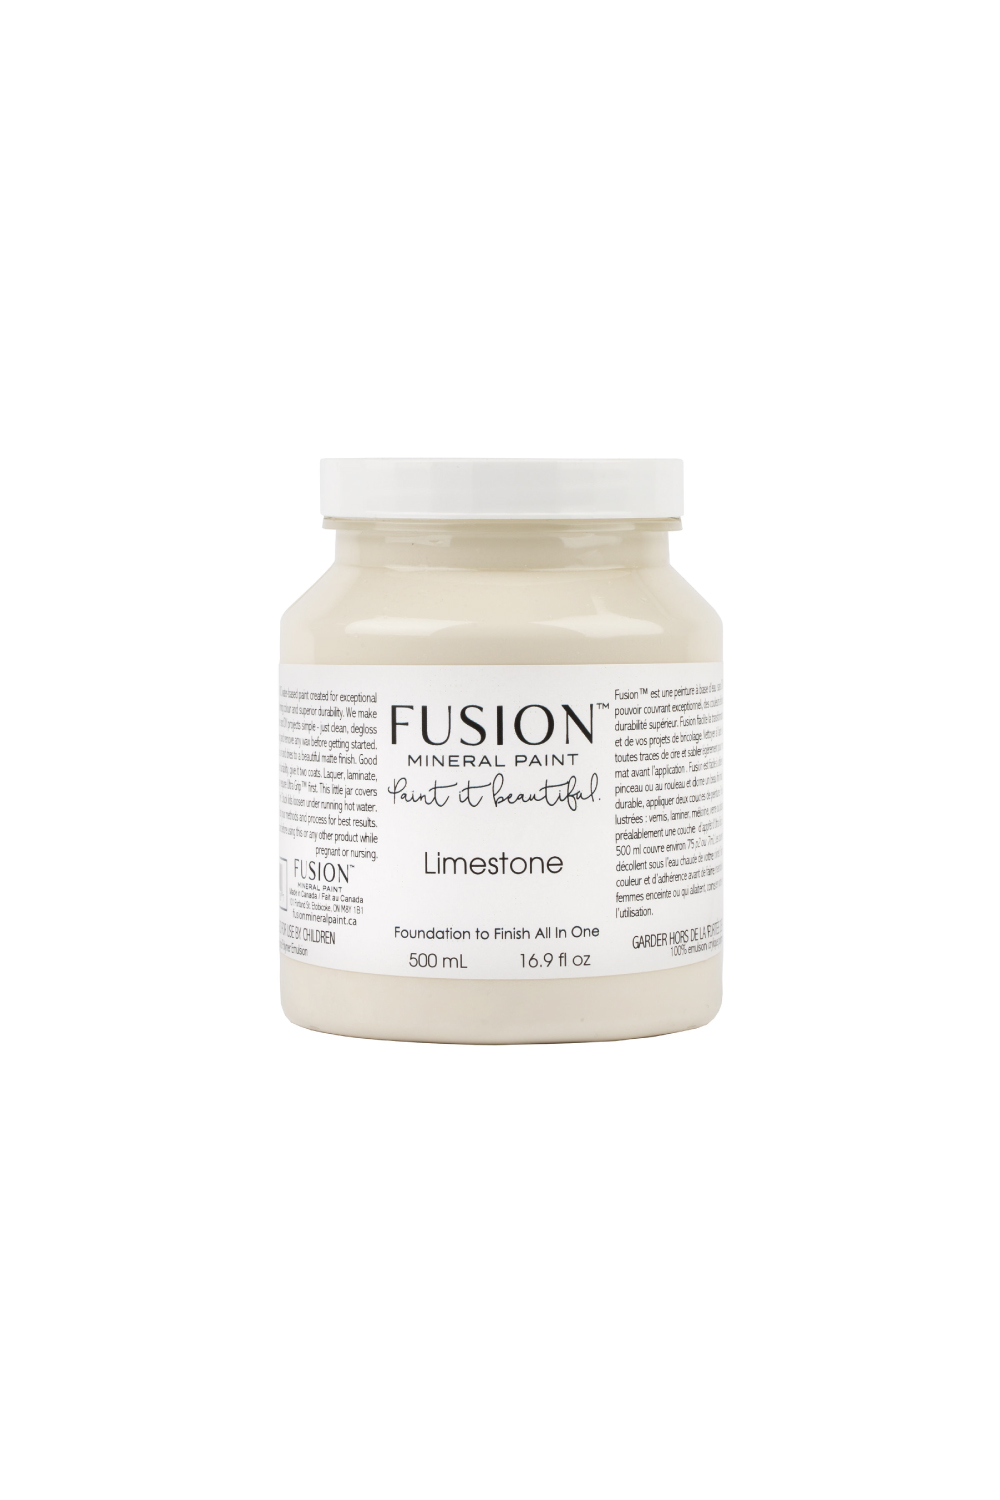 Fusion Mineral Paint vernice ecologica color gesso